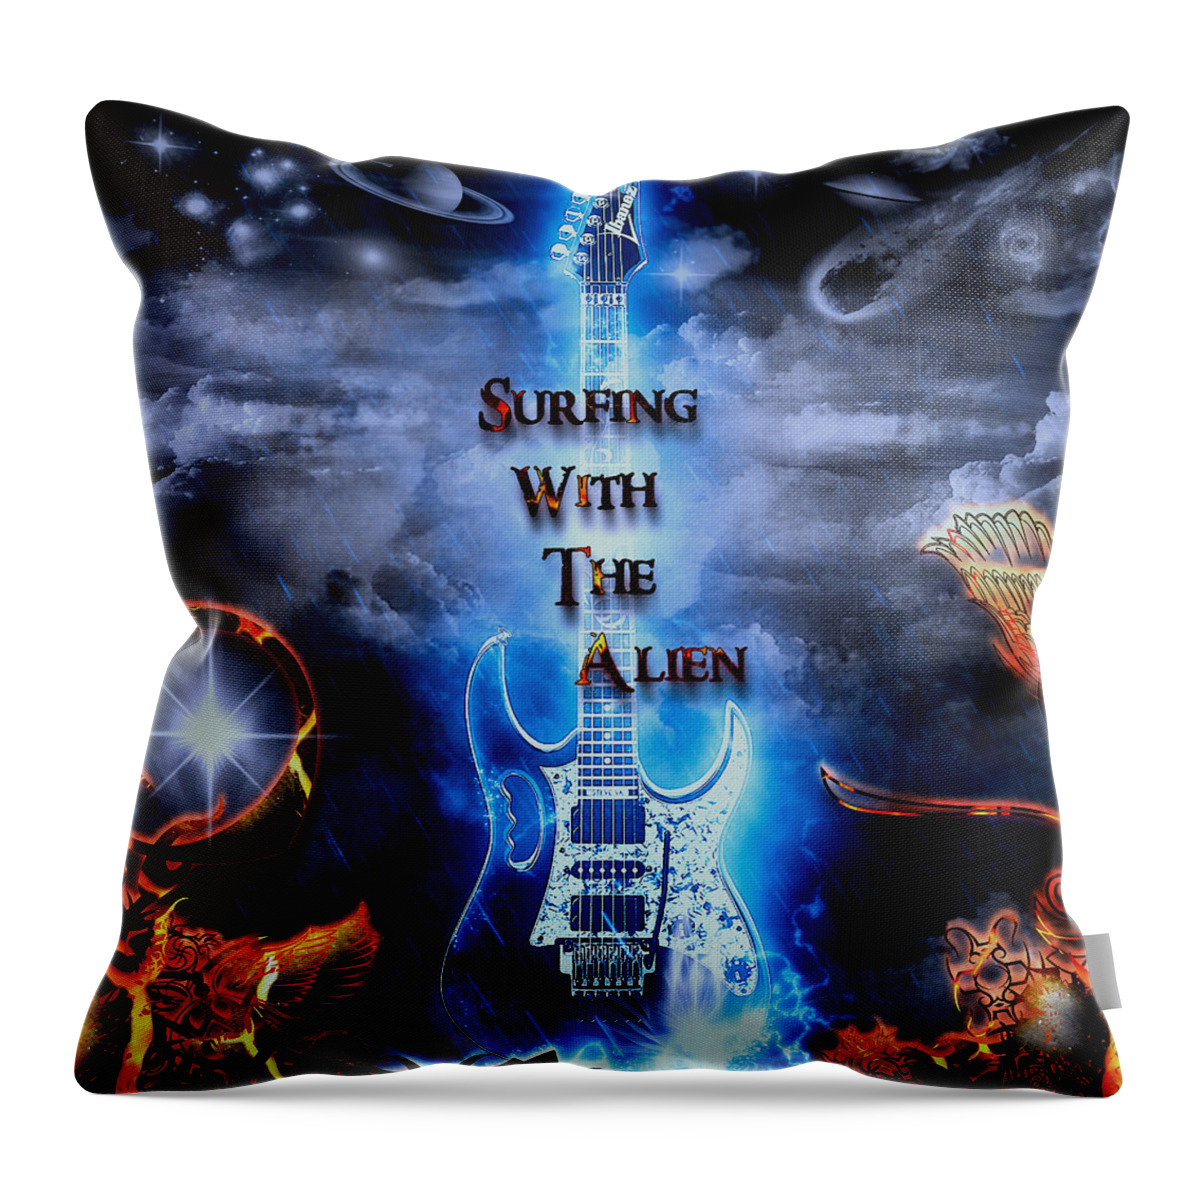 Surfing With The Alien Throw Pillow featuring the digital art Surfing With The Alien by Michael Damiani